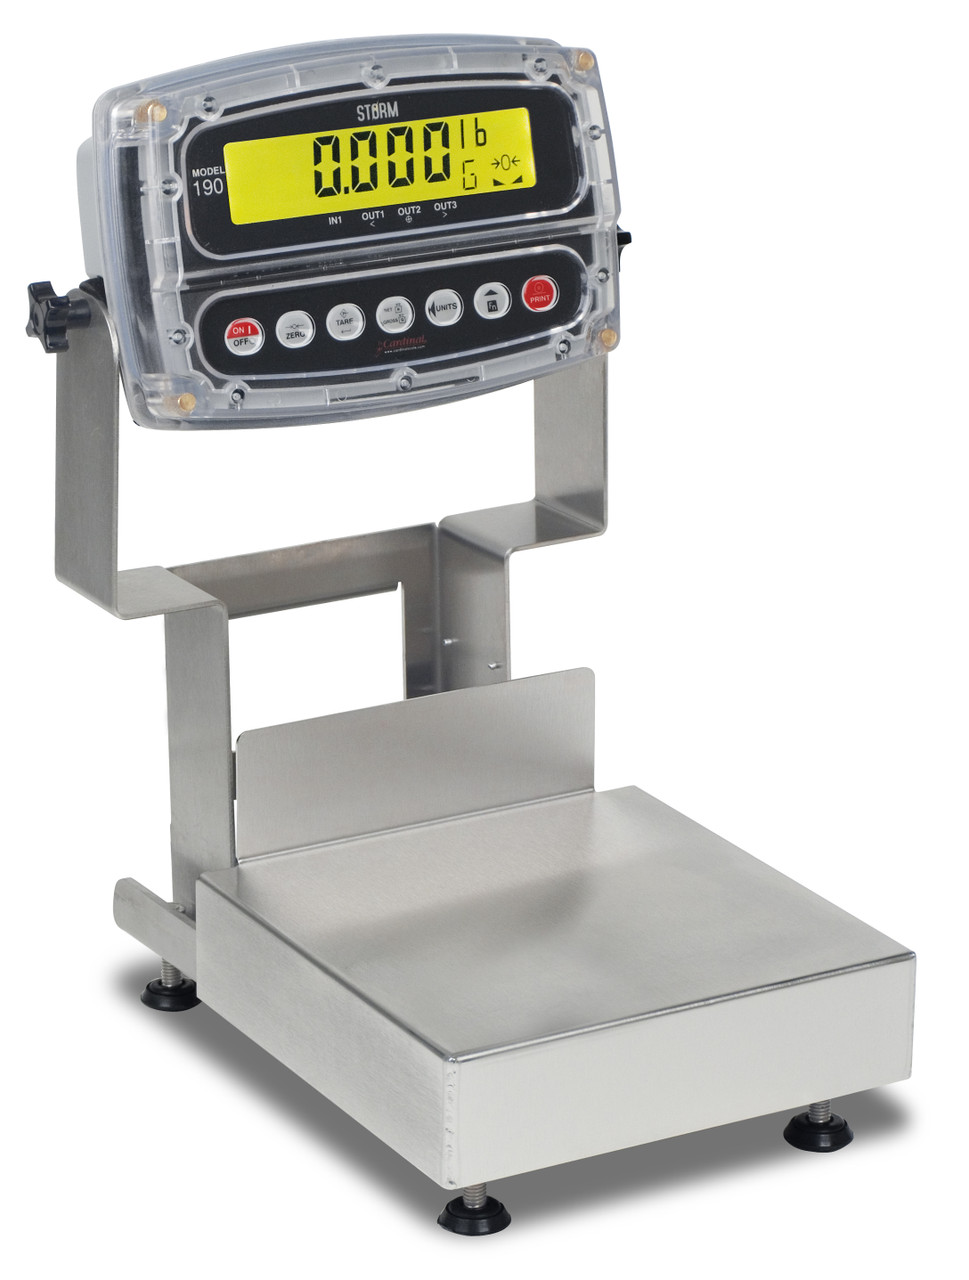 Cardinal Detecto 60 Kg Electronic Bench Scale 12" x 12" Stainless Steel Washdown 190 Indicator, Model# CA12-60KGW-190